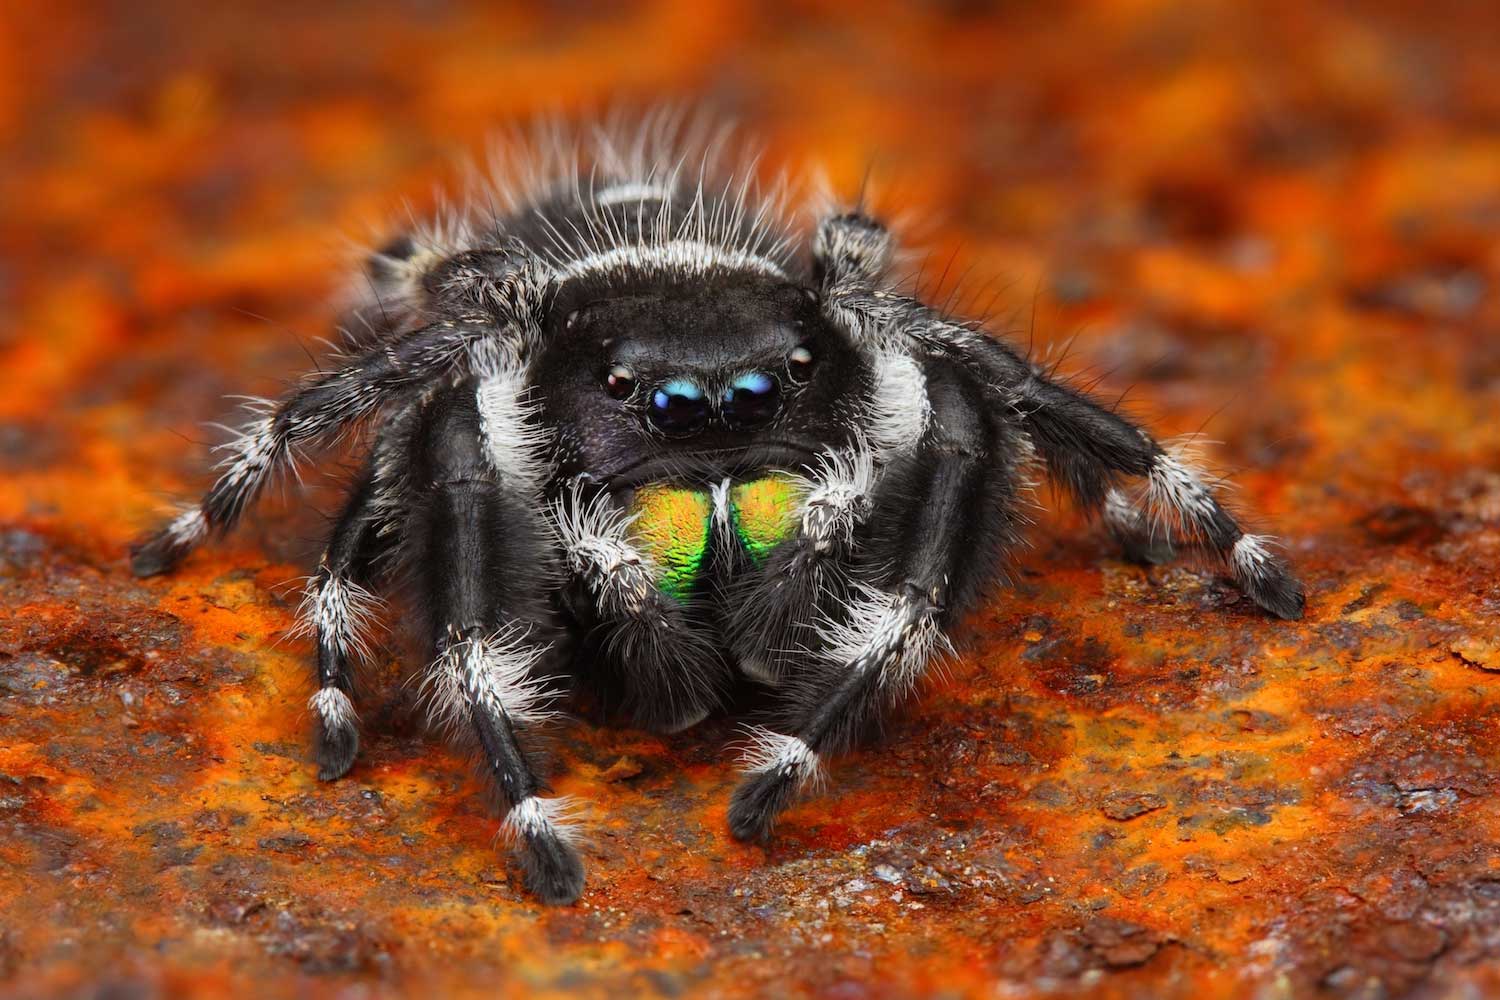 A fuzzy black and white spider.